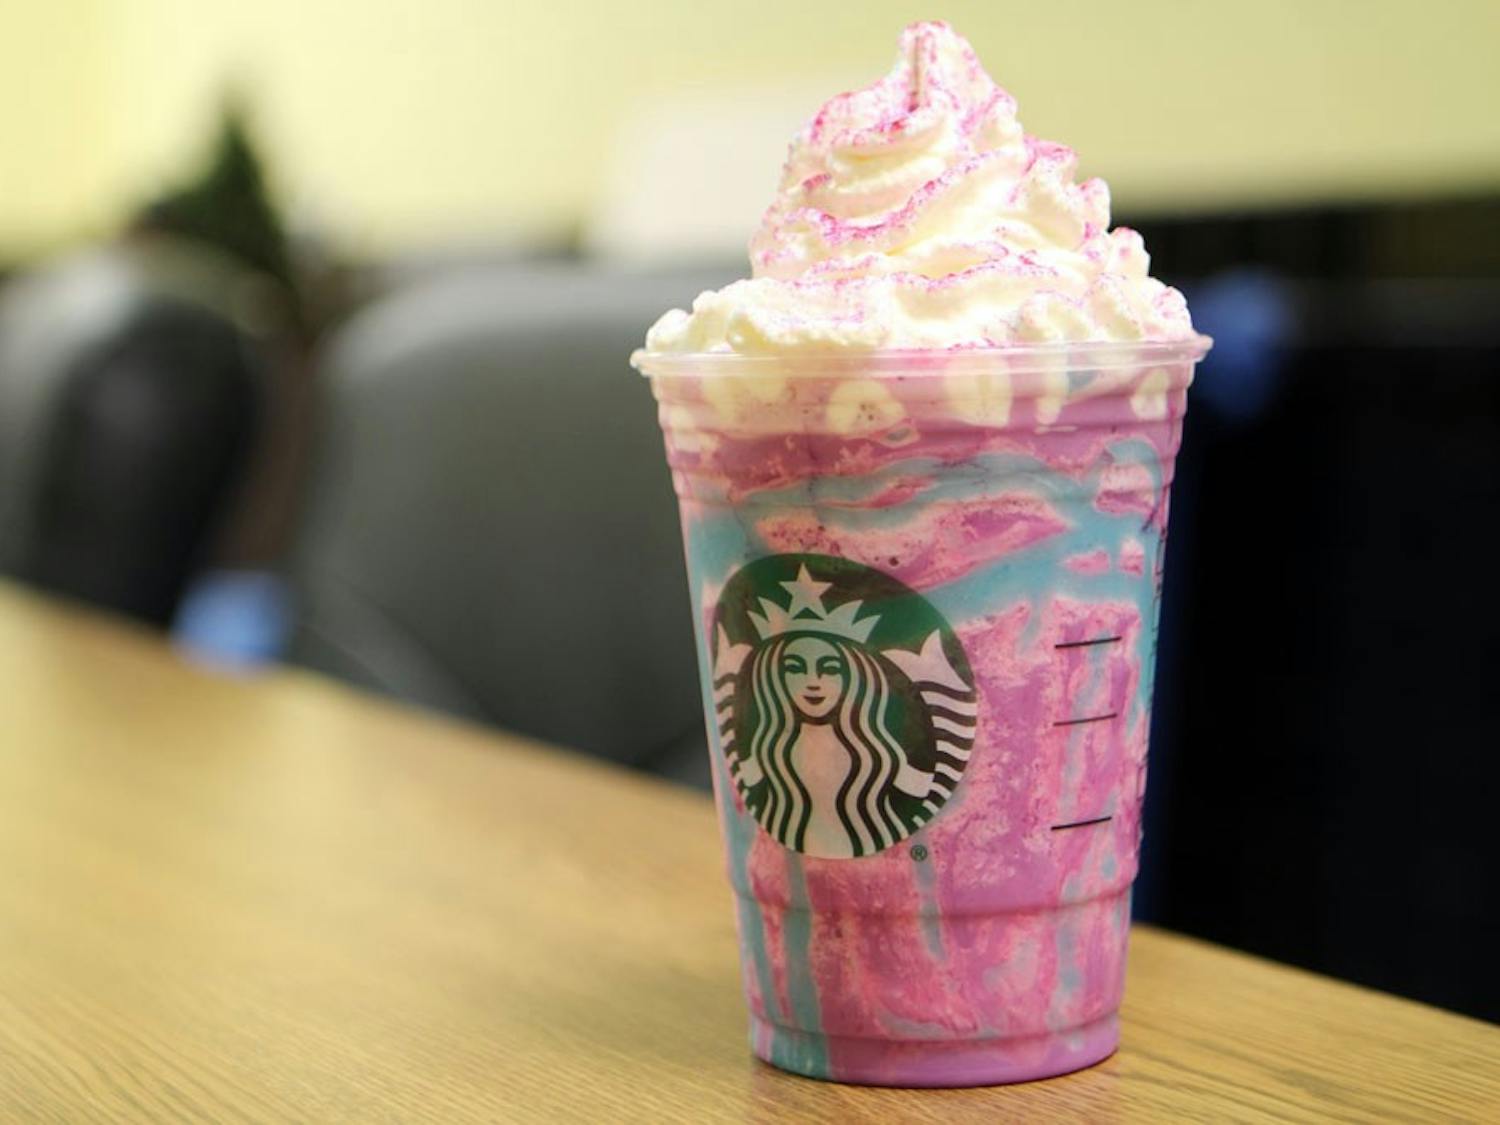 For a limited time Starbucks’ Unicorn Frappuccino is available at participating stores. The drink changes color and goes from sweet to sour as you drink it.